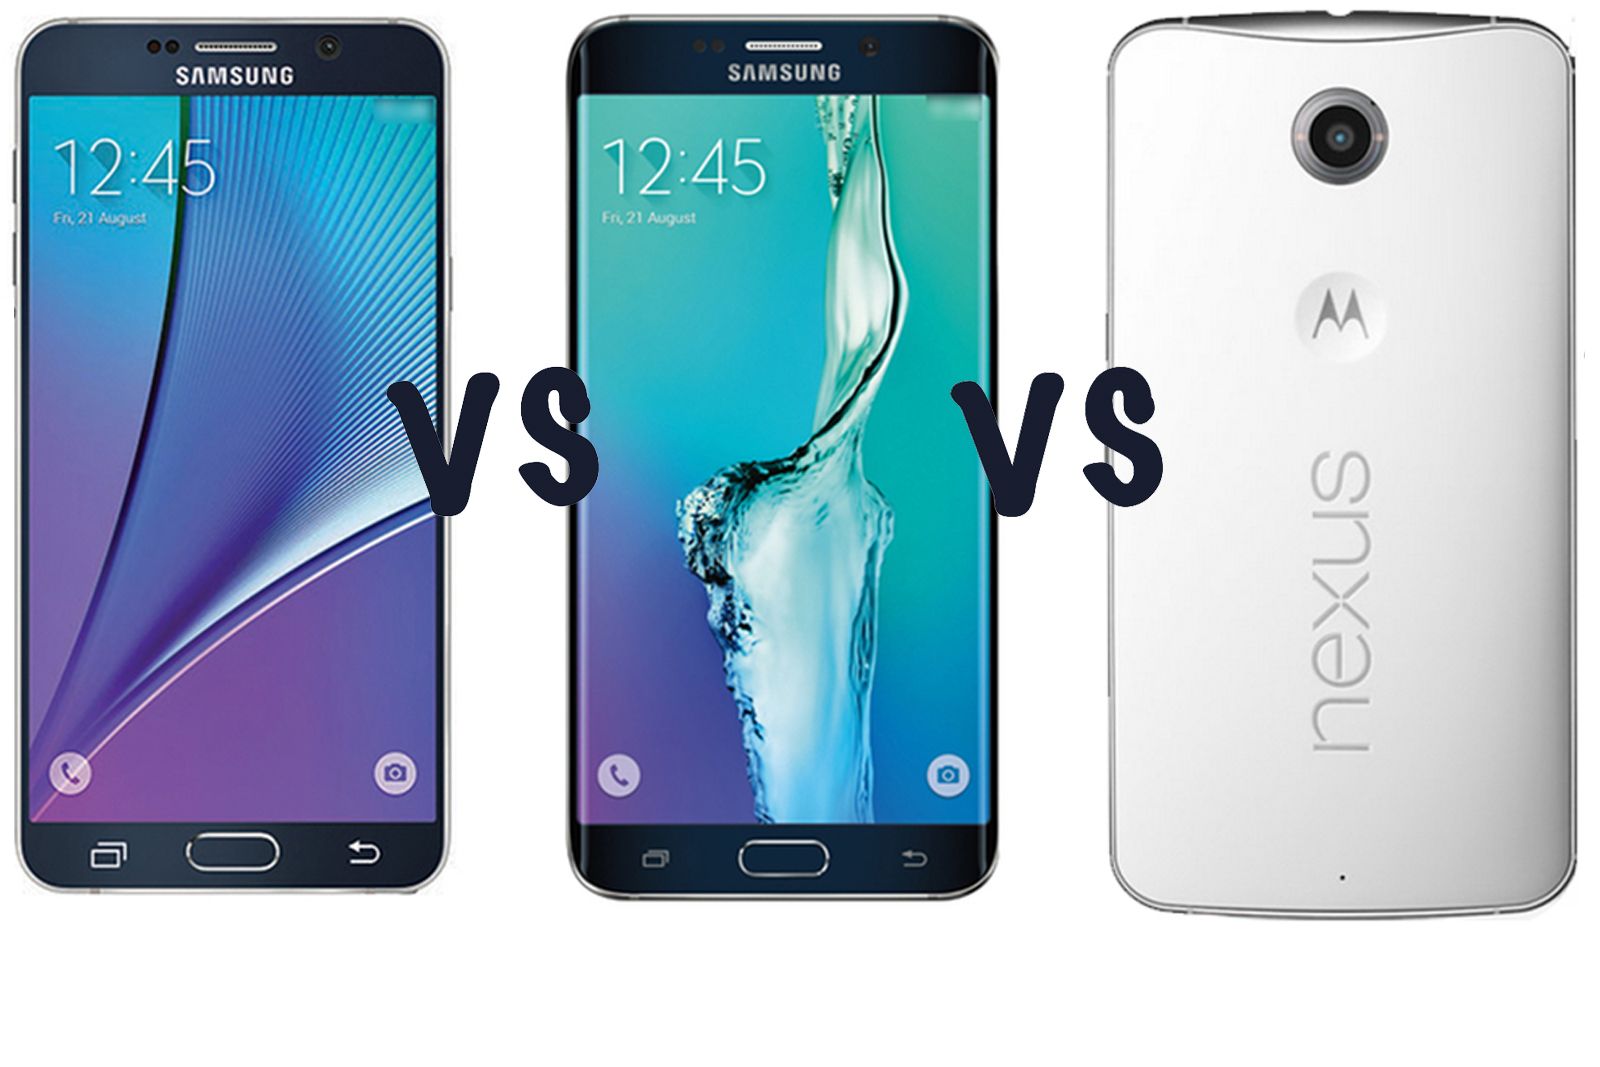 samsung galaxy s6 edge plus vs galaxy note 5 vs google nexus 6 what s the difference  image 1